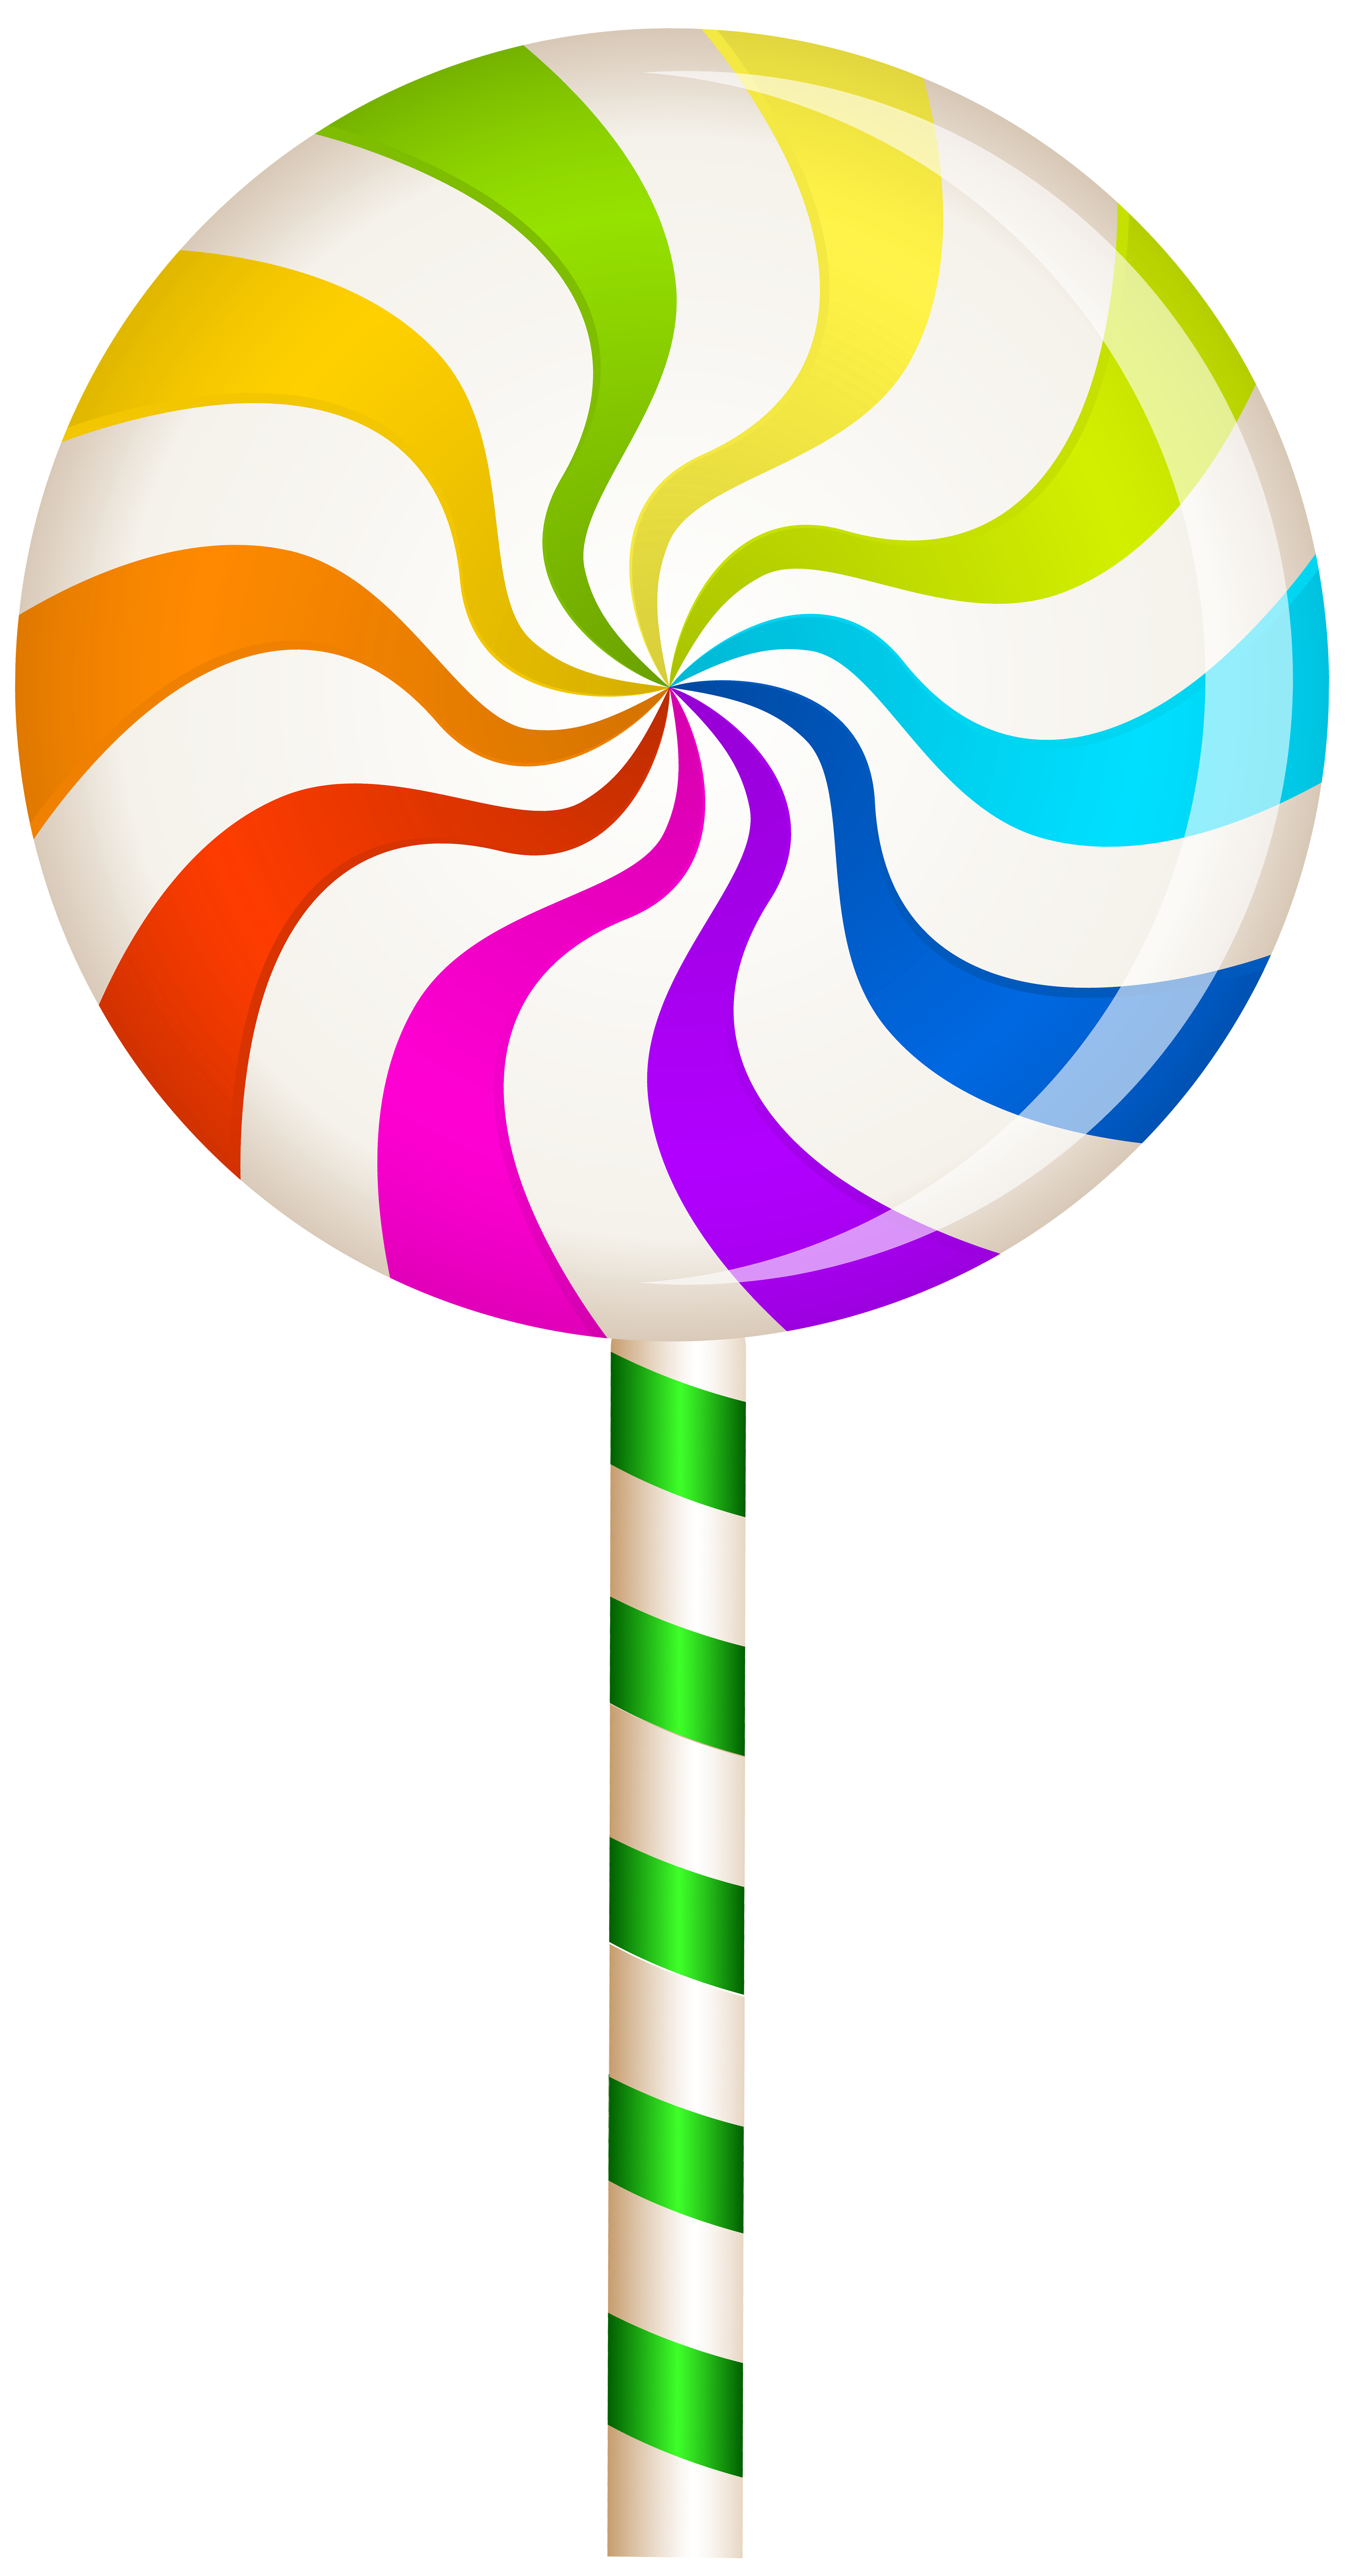 clipart candy confectionary